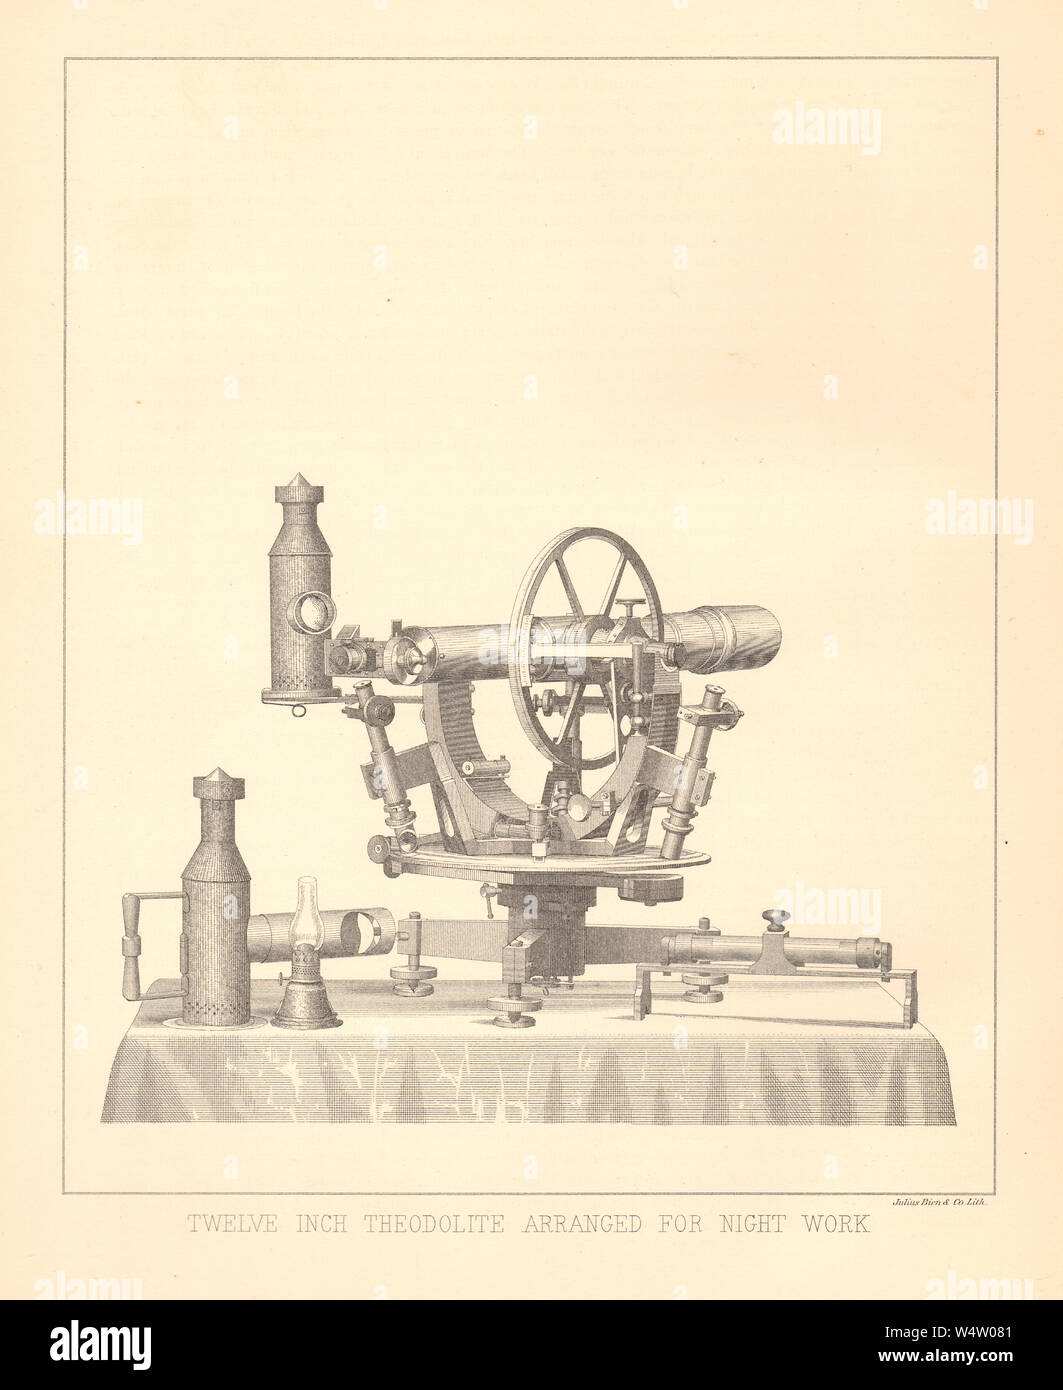 Twelve-inch Direction Theodolite, arranged for use at night, including lamps, striding level and vertical circle - Antiquarian bookplate illustration Stock Photo